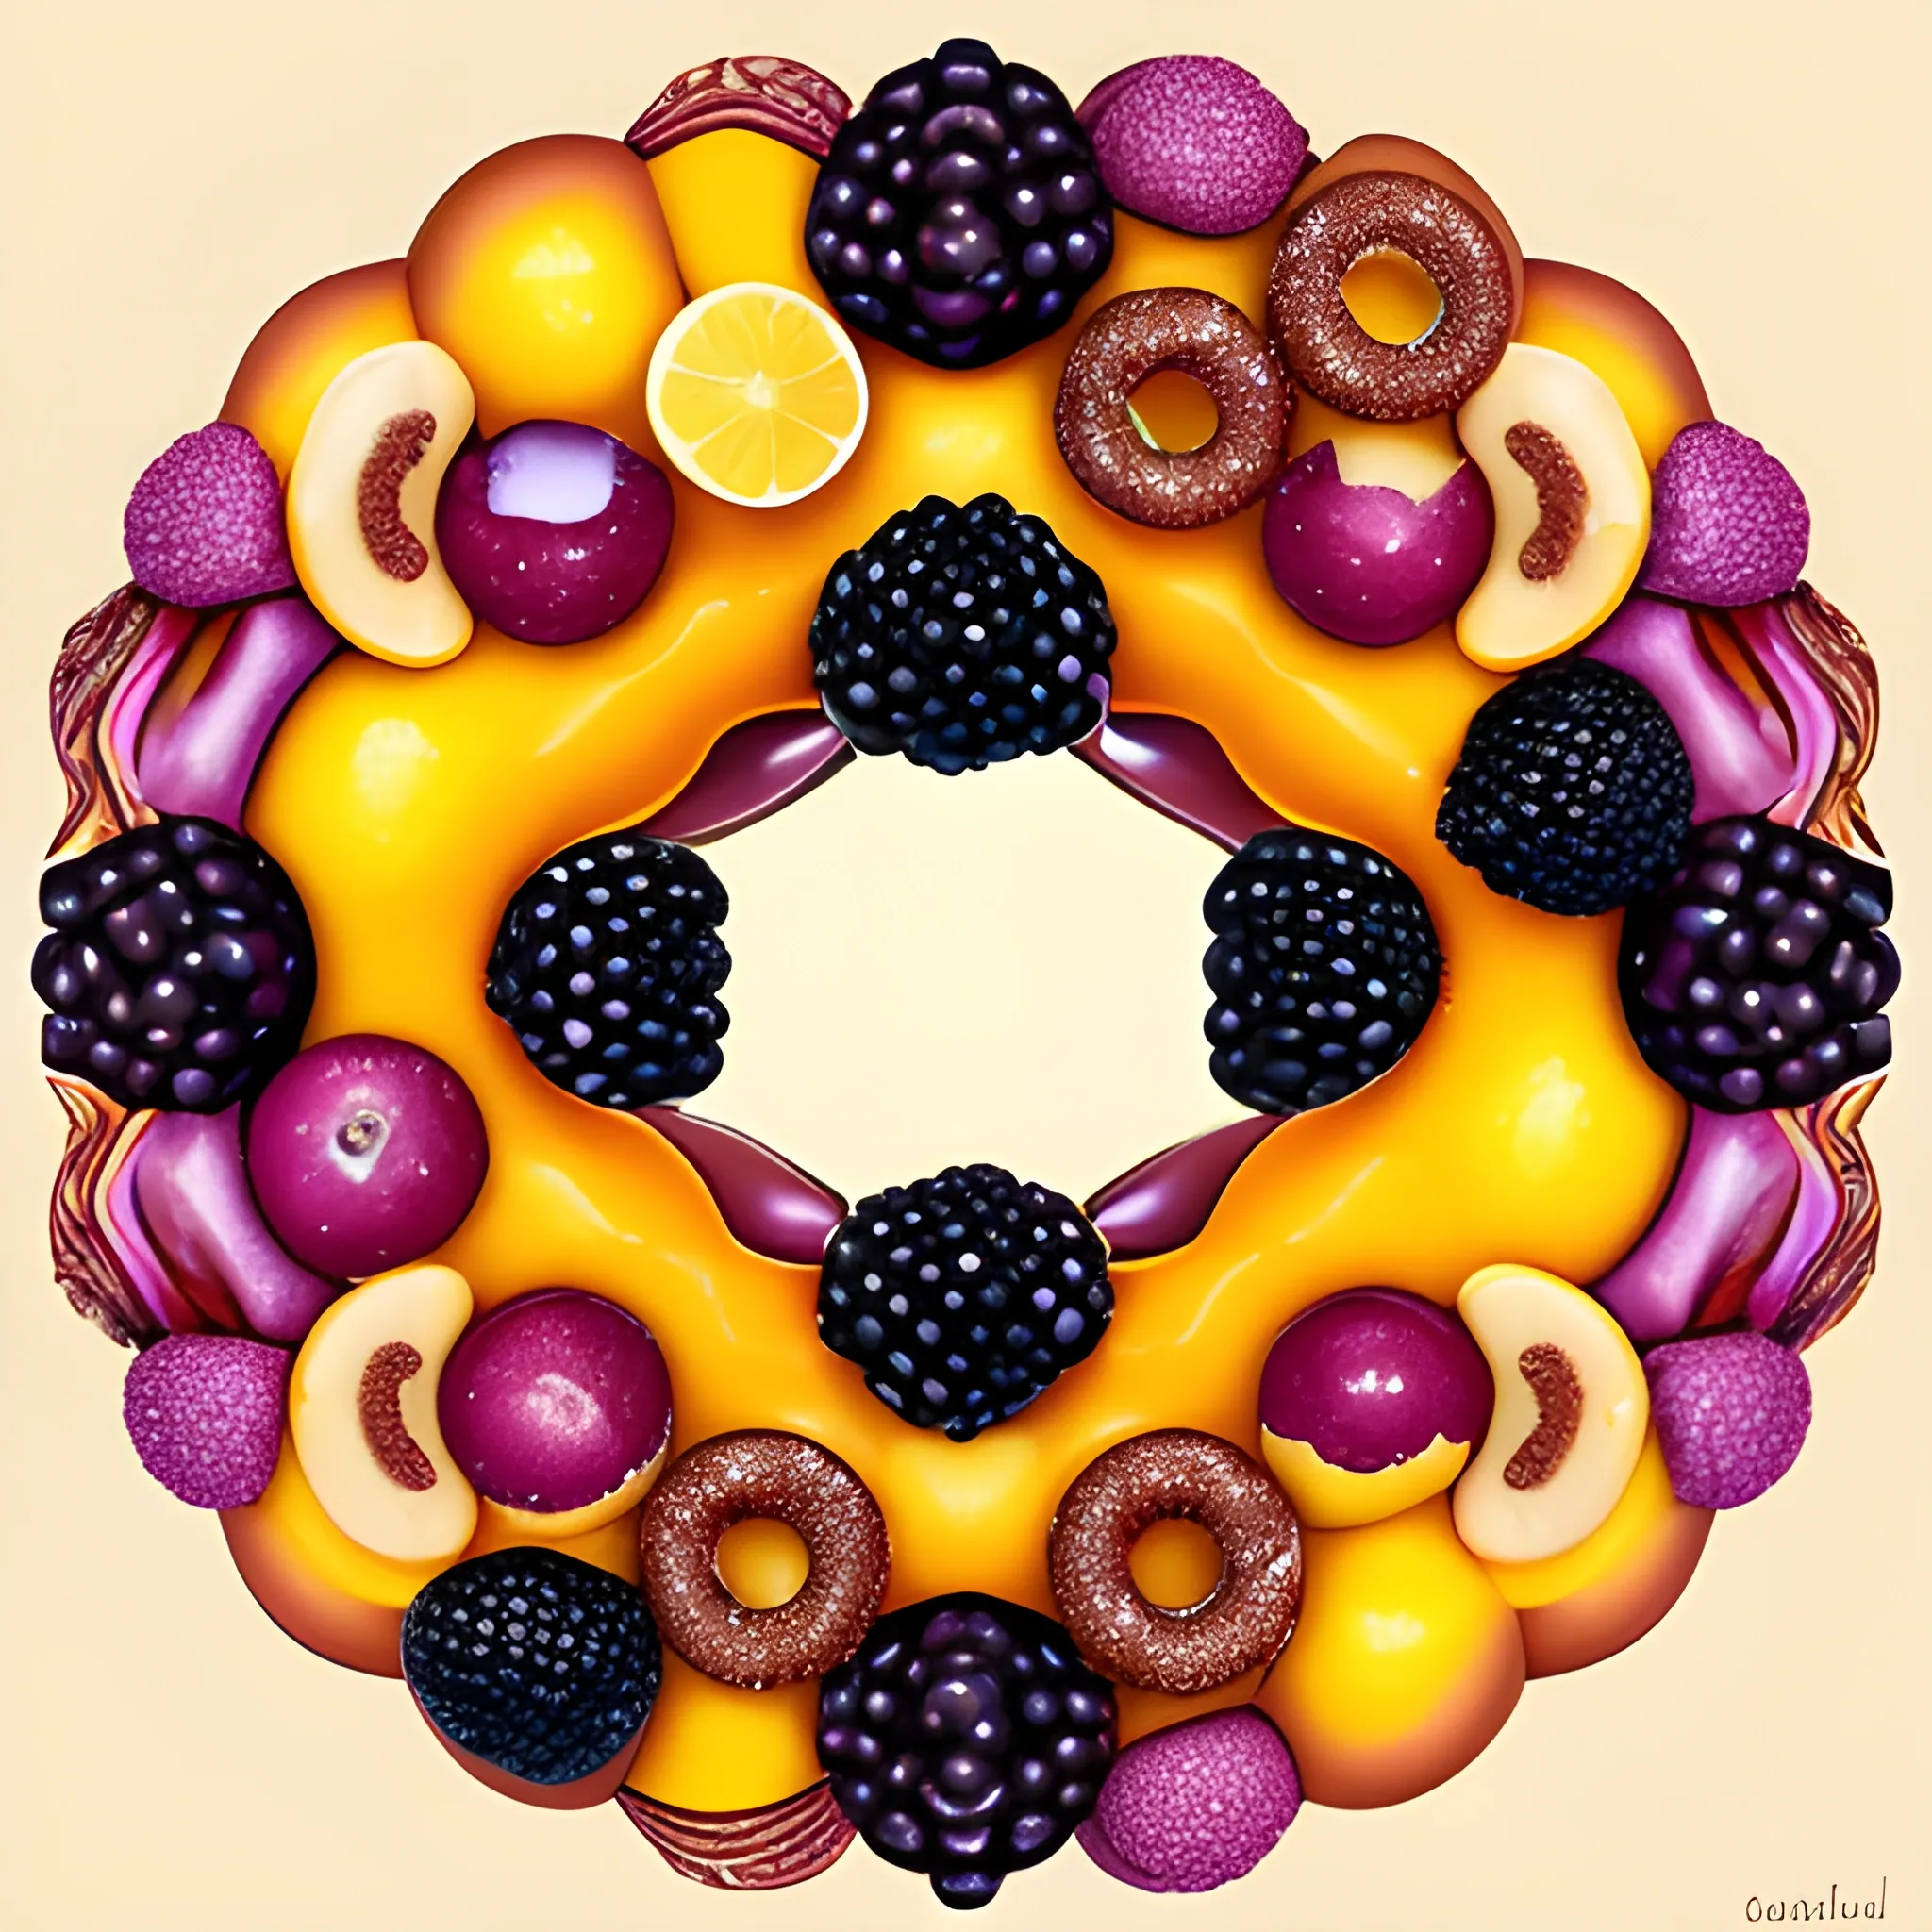 Make a huge donut full of caramel, chocolate, lemon cream, blackberries, macro photography, abstract, surreal art, Surrealism, whimsical illustrations, vibrant colors, intricate details, illustration,
